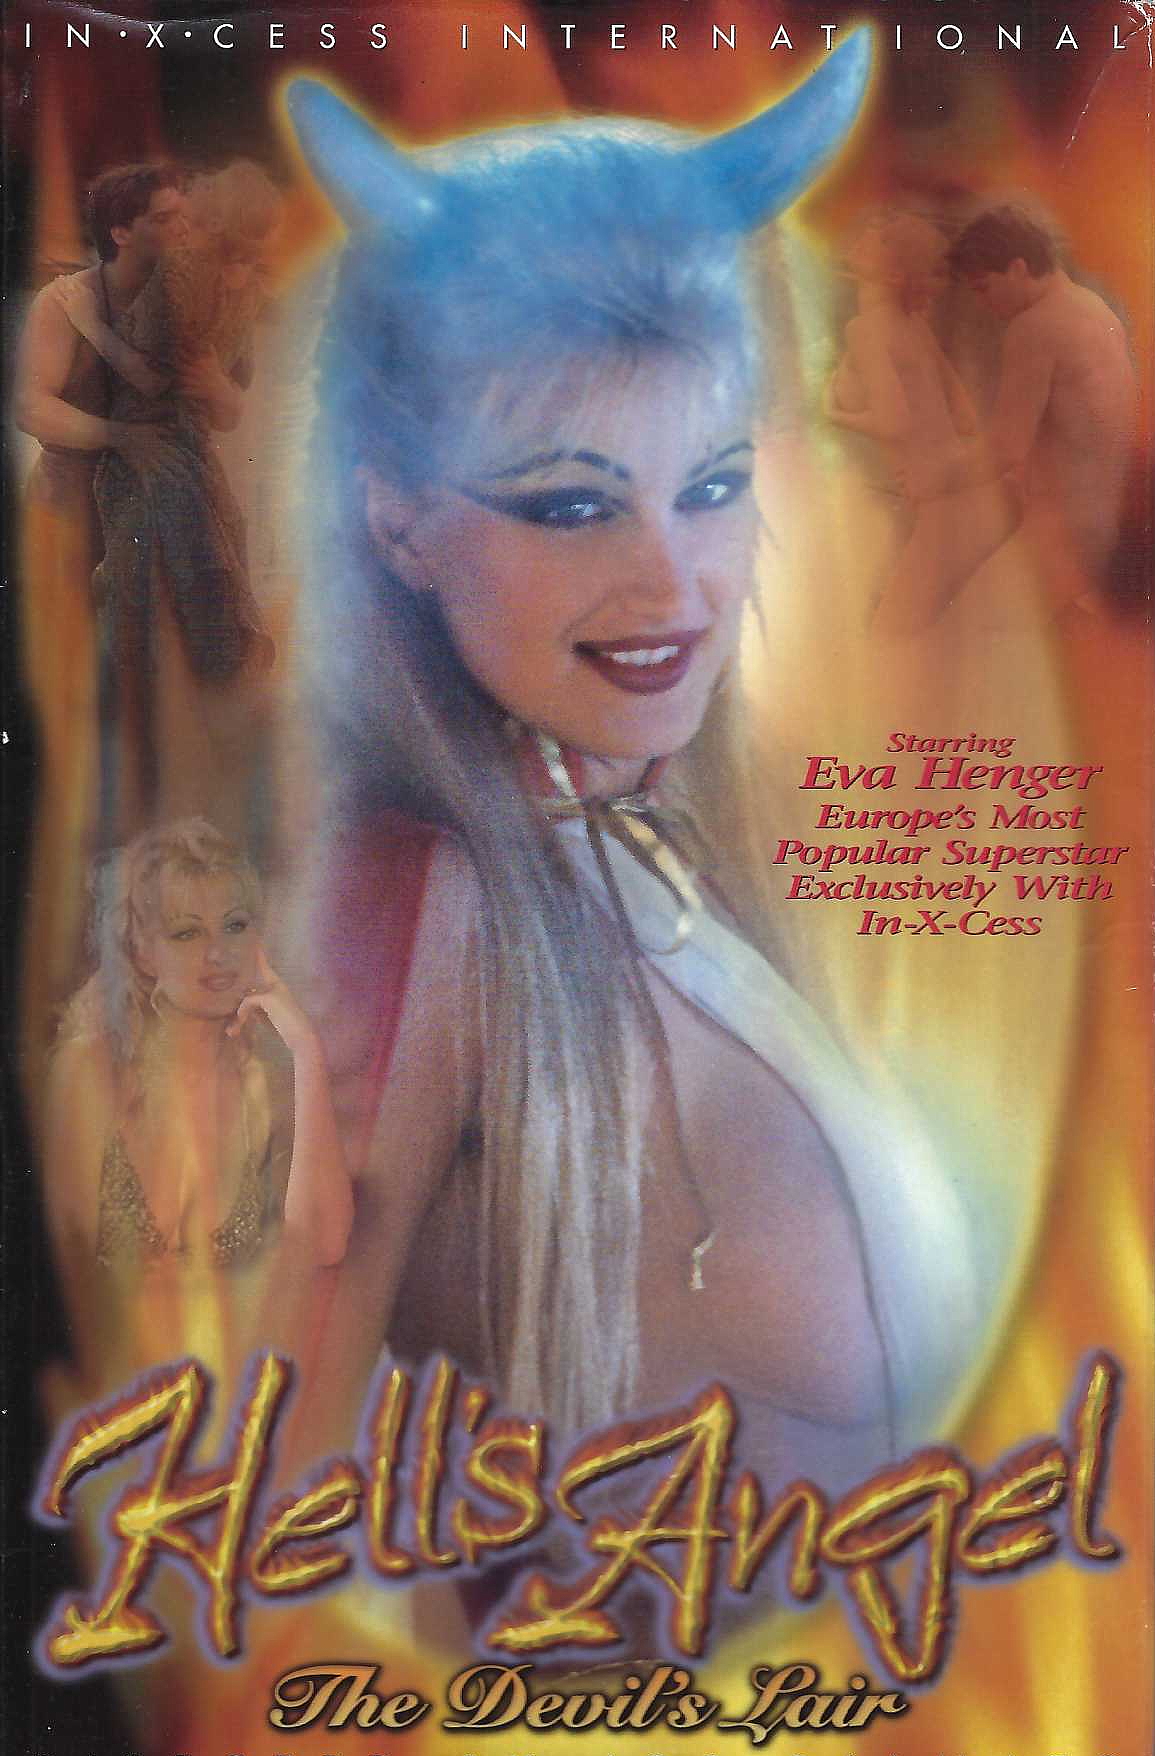 VHS XXX Porno Movies, adult vhs movies for sale, vhs xxx, vhs adult video -